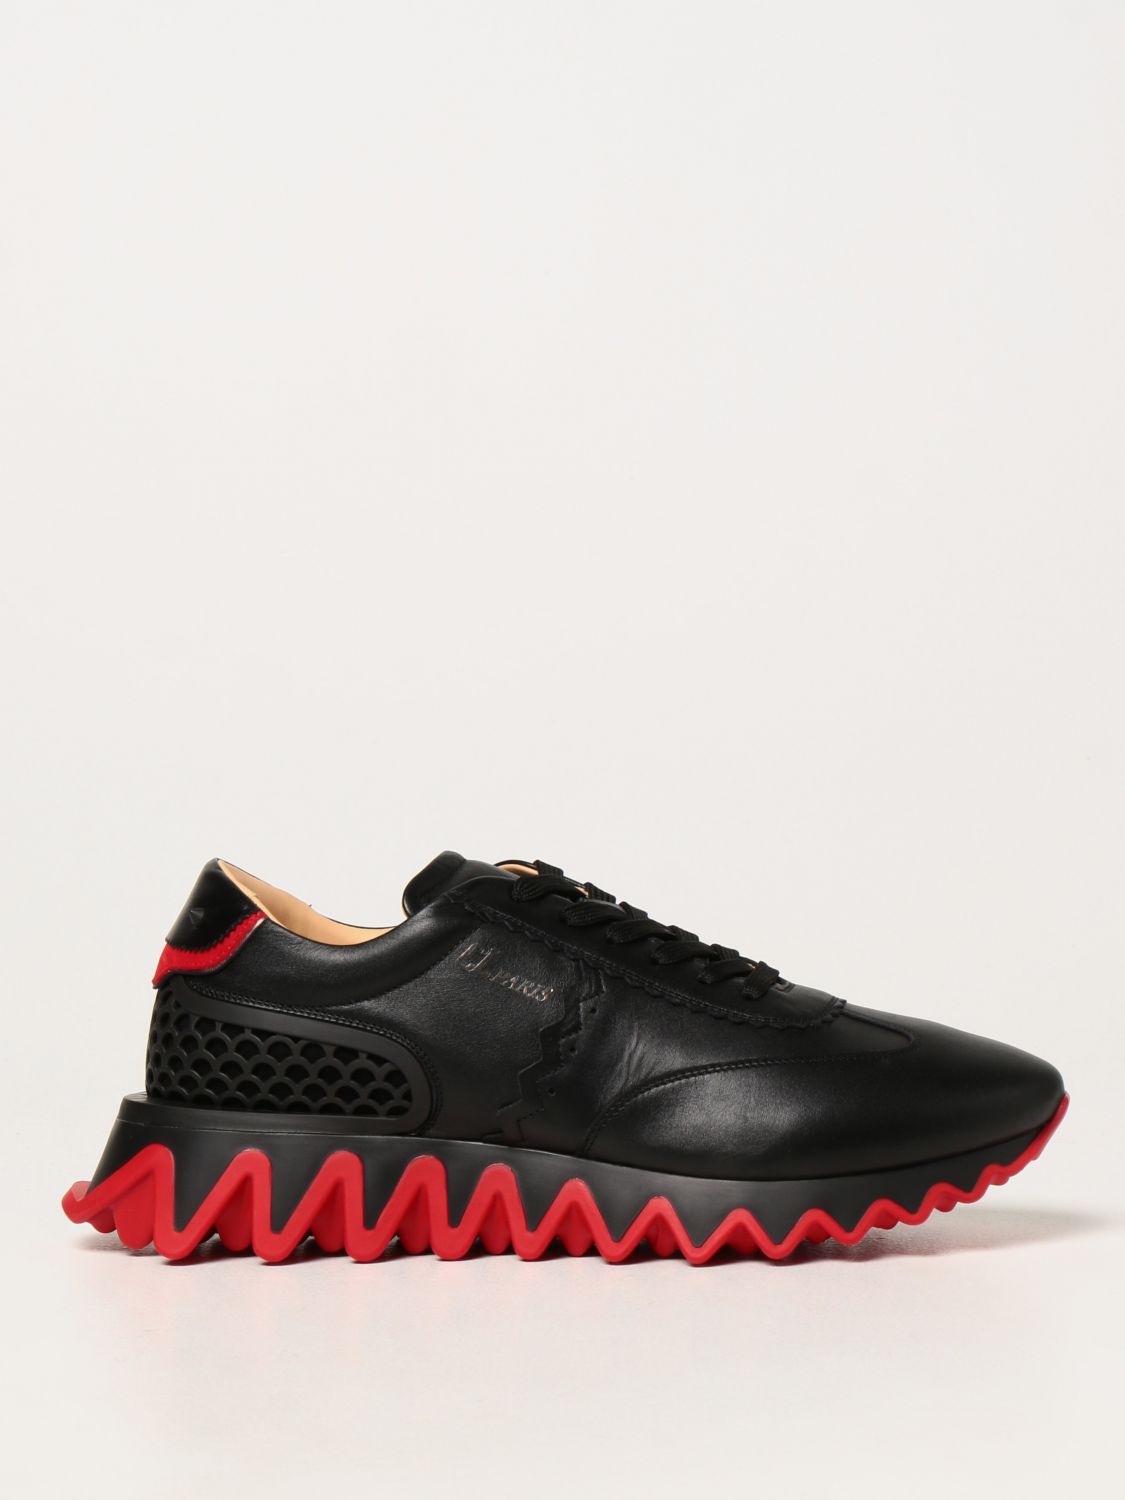 CHRISTIAN LOUBOUTIN: Chaussures homme | Baskets Christian Louboutin Homme Noir | Baskets 3210983 GIGLIO.COM